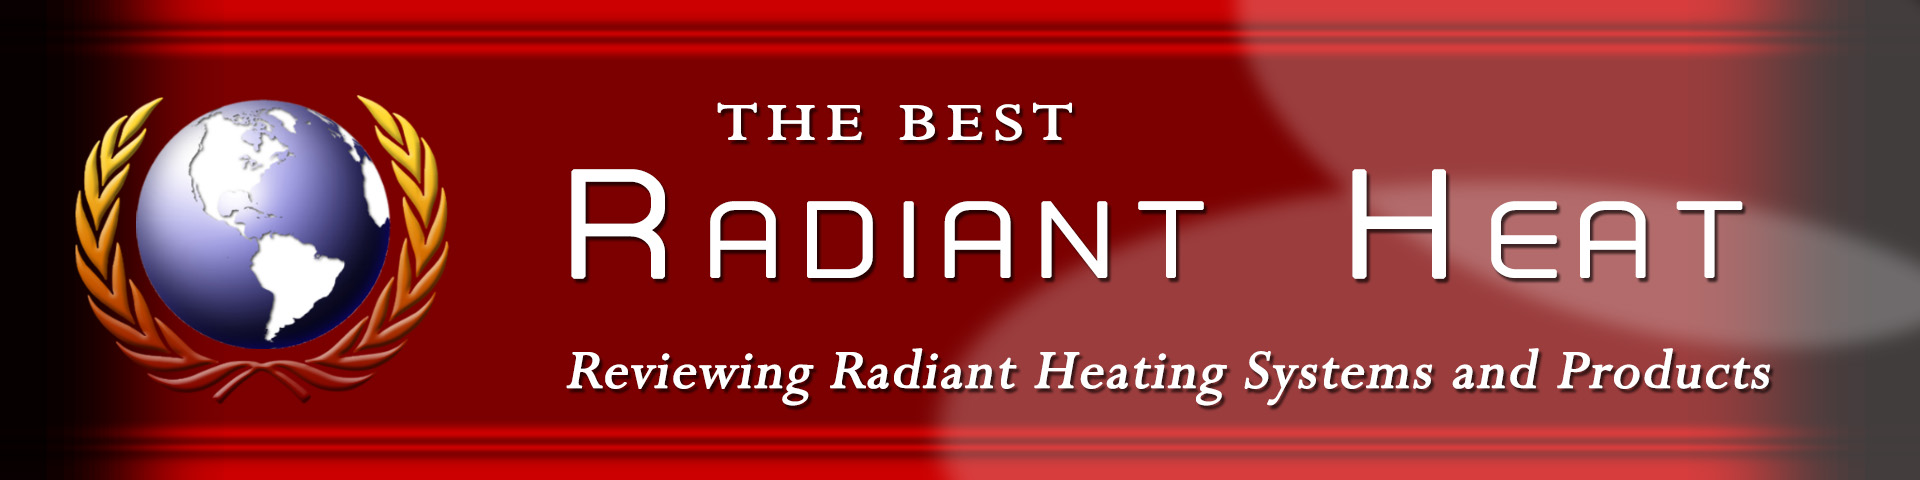 Best radiant heating systems banner.